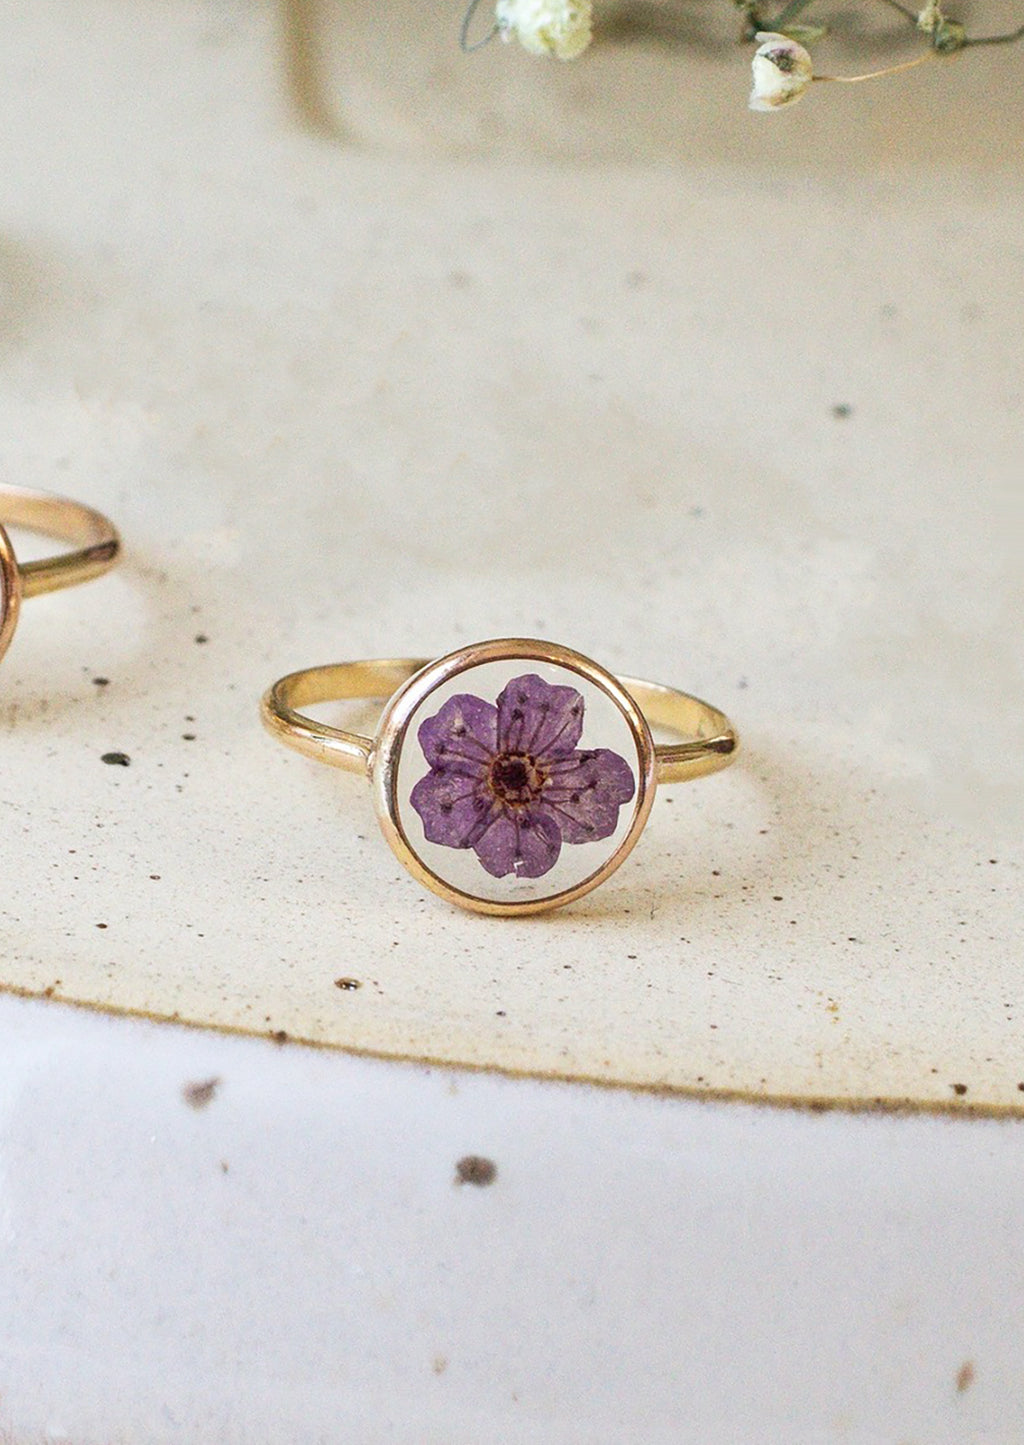 Size 5 / Purple: A gold round bezel ring showing purple flower on clear background.